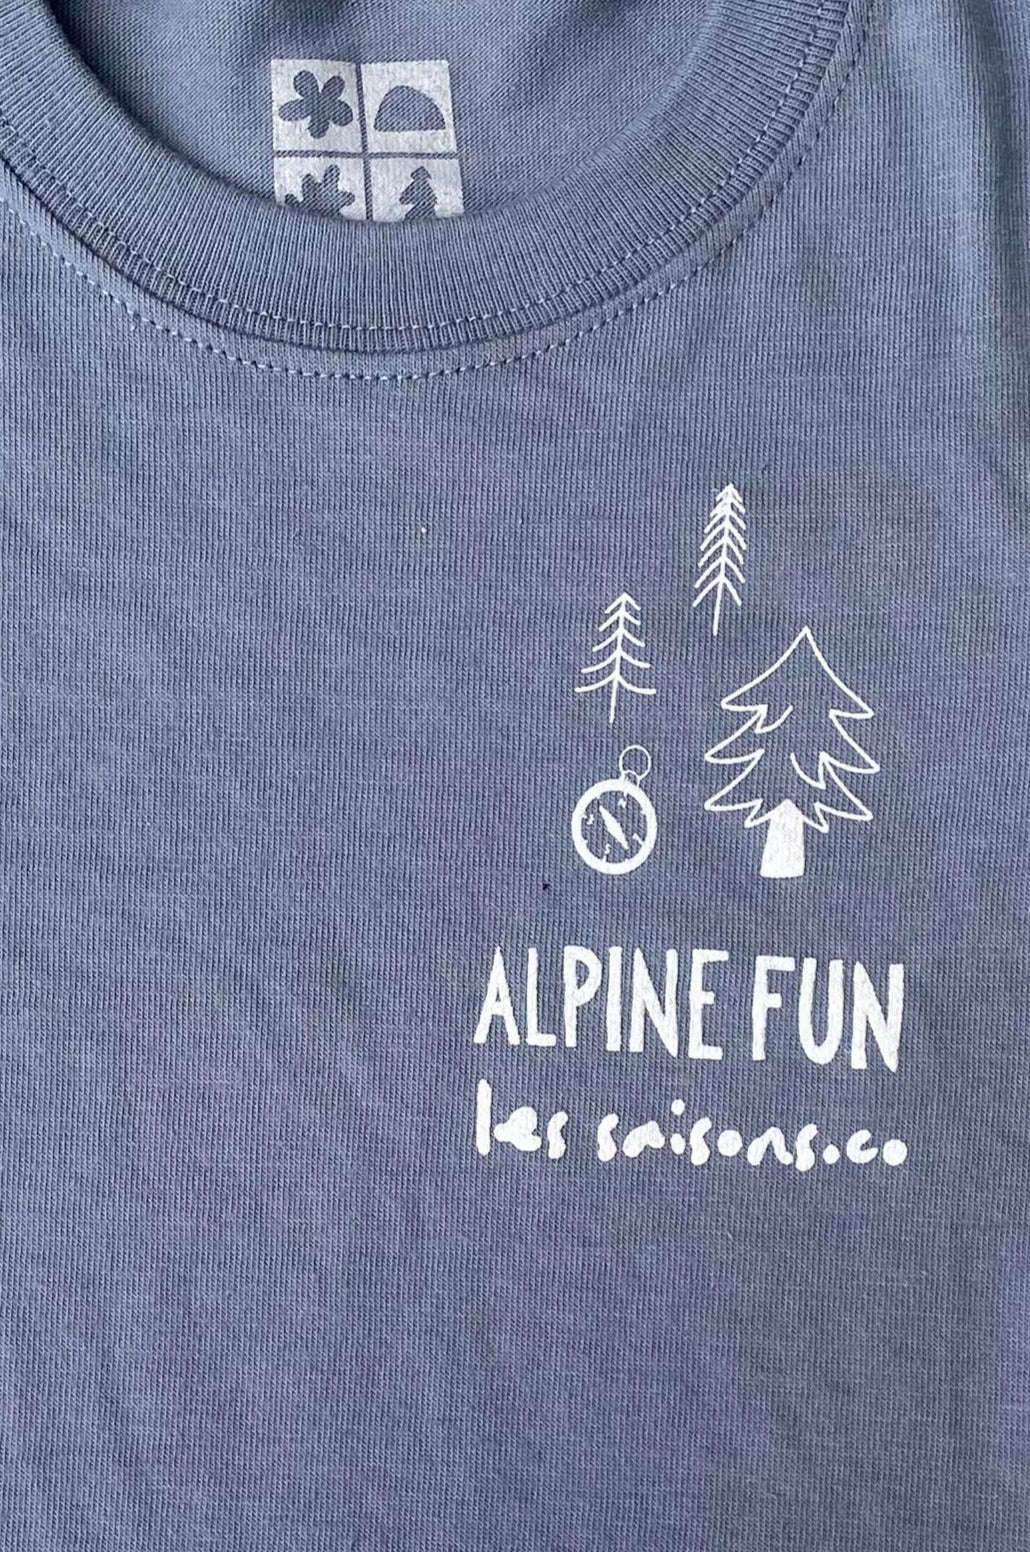 Kids' T-Shirt | Alpine Fun | 2 to 6 Years Old | Printed in Montreal